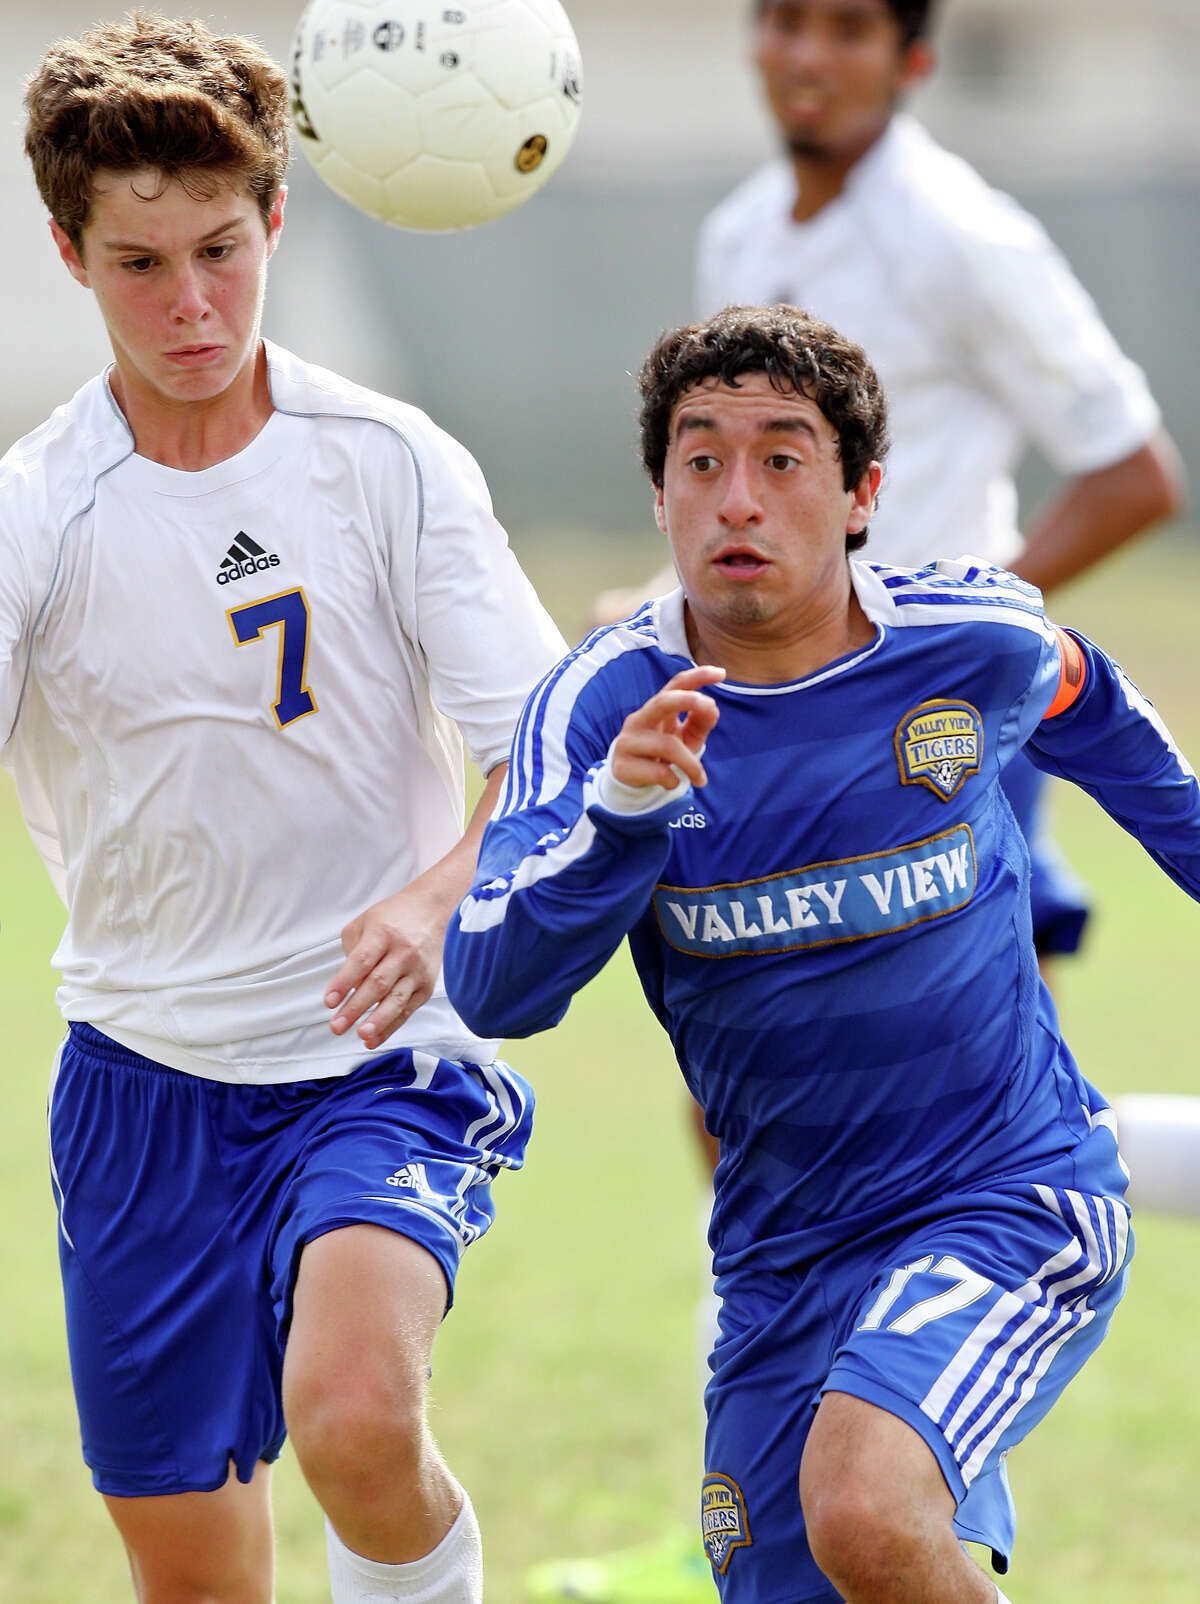 Alamo Heights' Mitch Katona and Pharr Valley View's Noe Moncada chase after the ball during second half action of their Region IV-4A final held April 14, 2012 at Cabaniss Field in Corpus Christi, Tx.